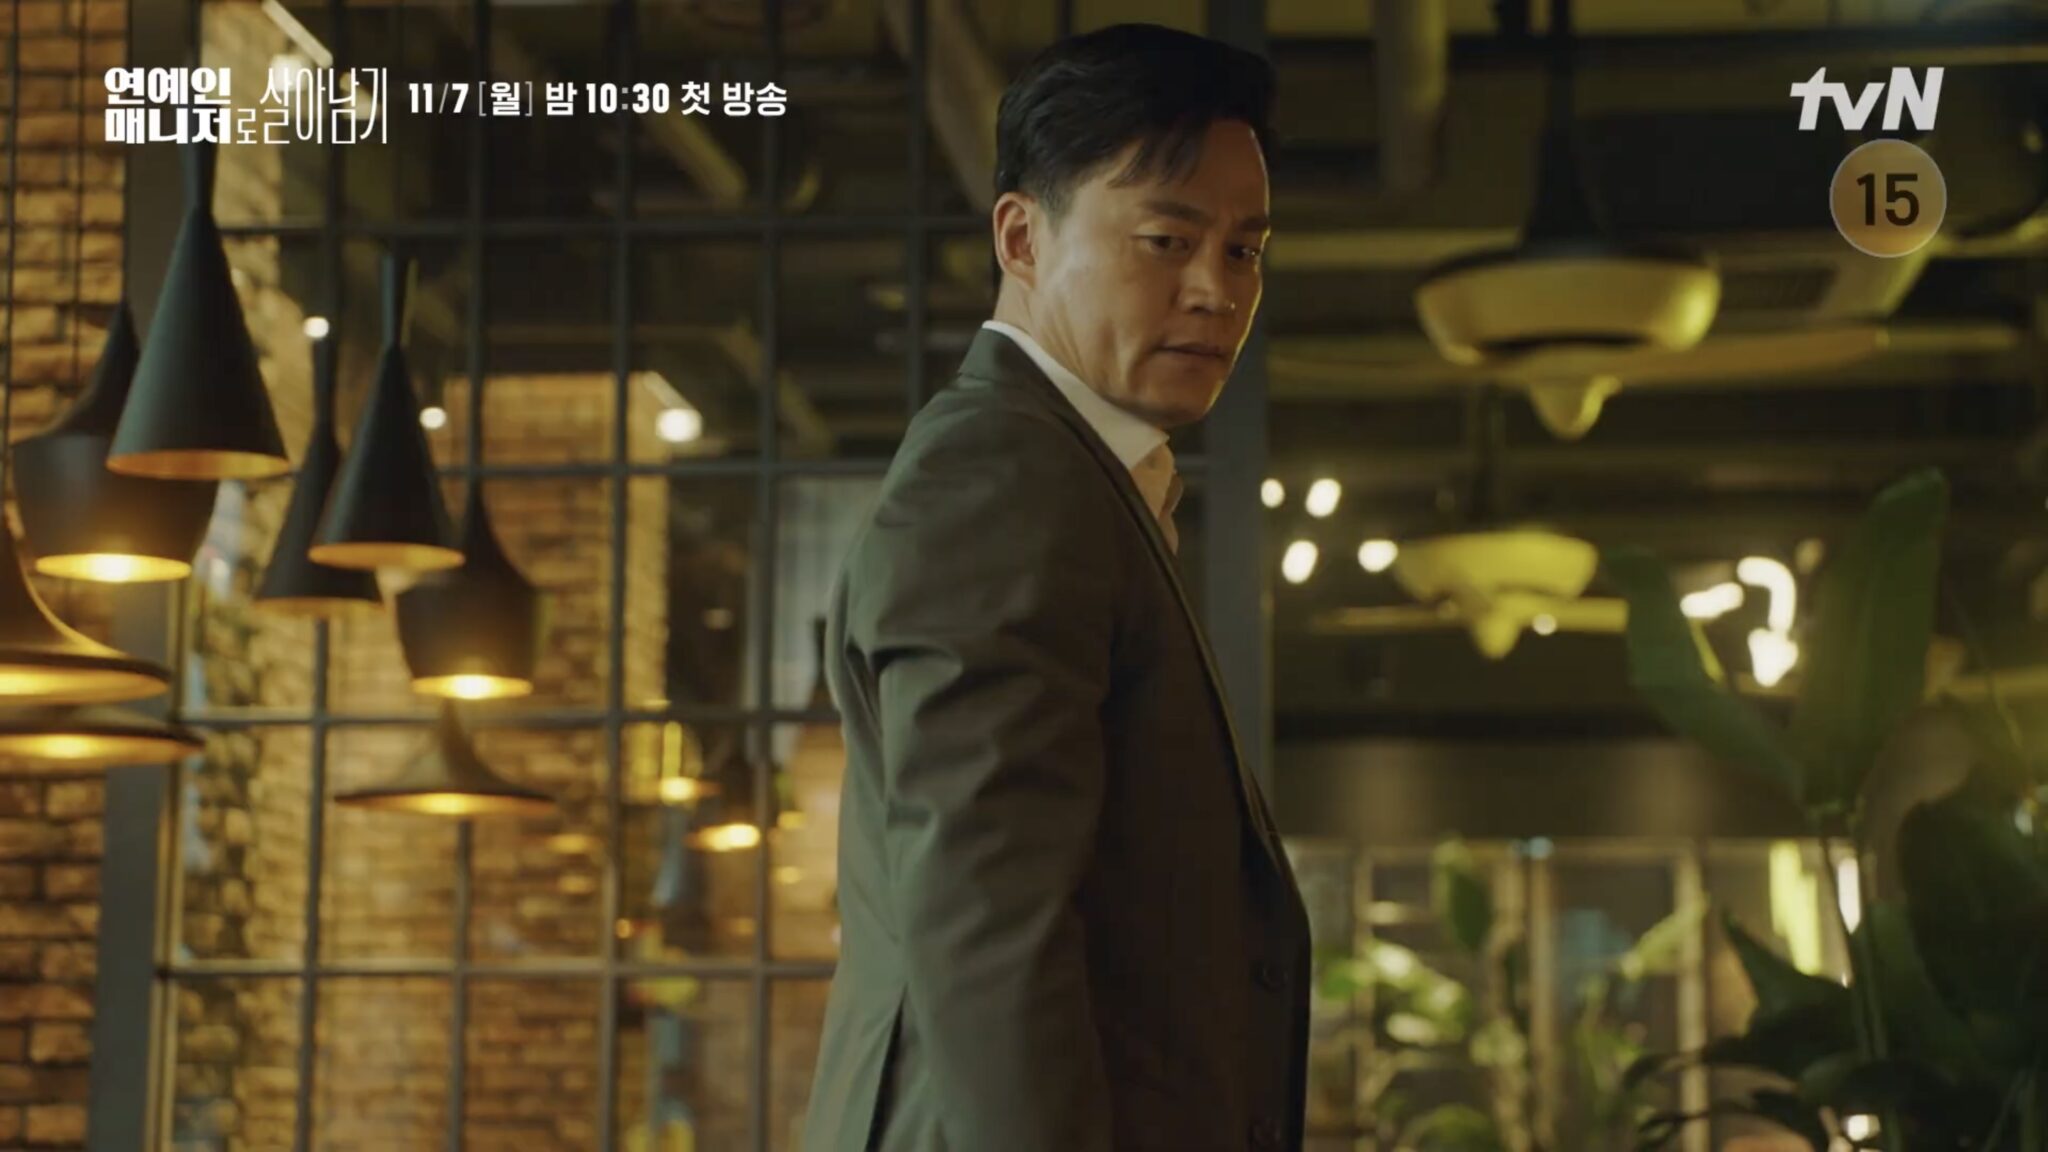 A glimpse into the hard work Behind Every Star in tvN's latest teaser